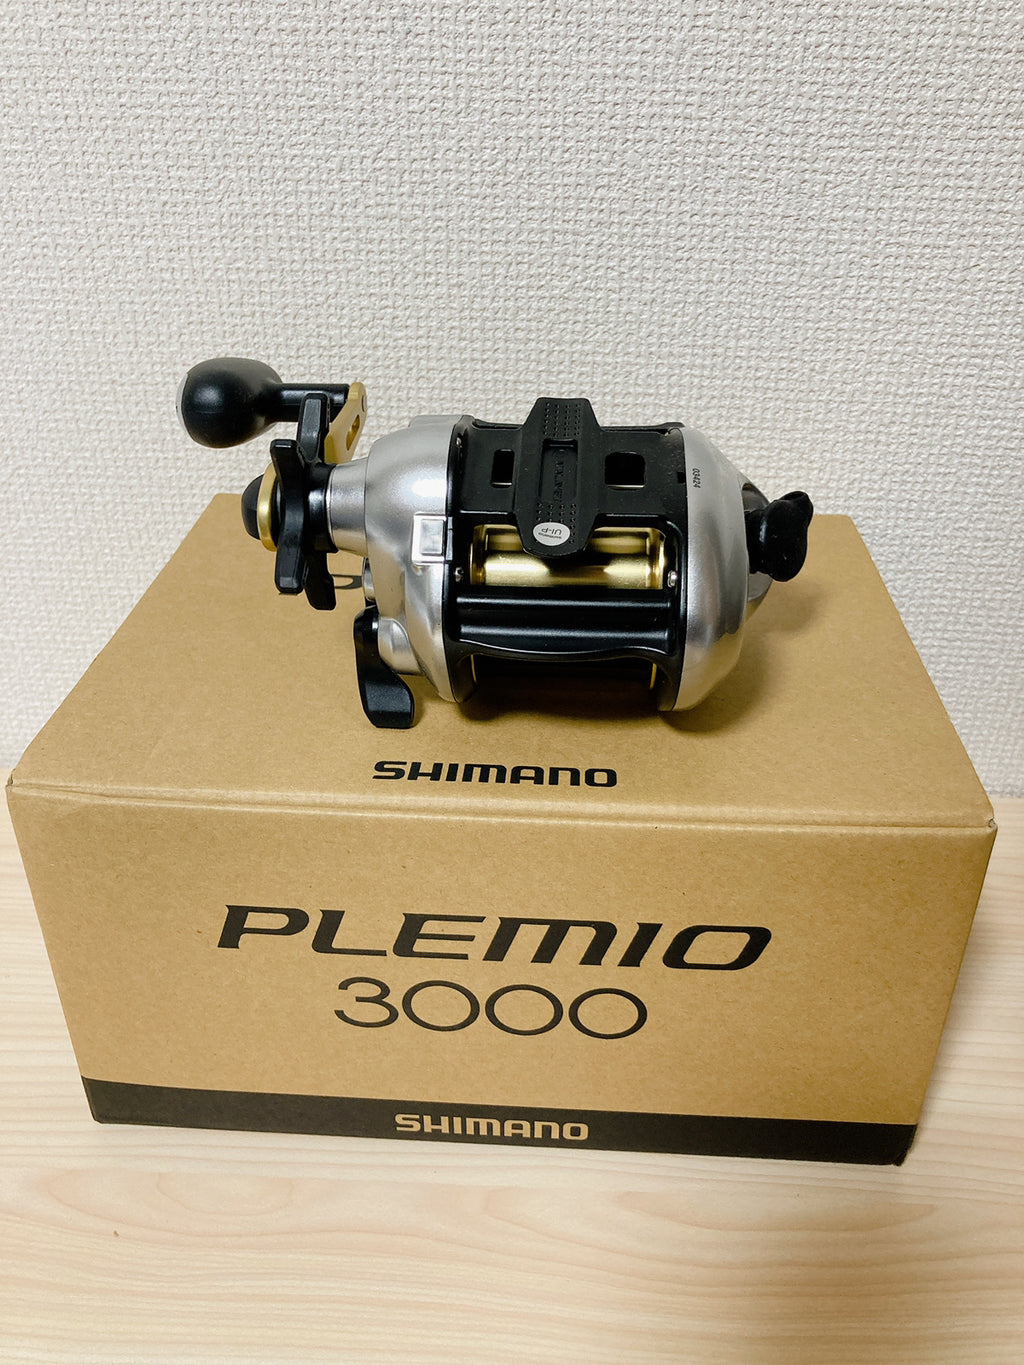 SHIMANO electric reel 15 premio 3000 right handle genuine from JAPAN F/S  Used